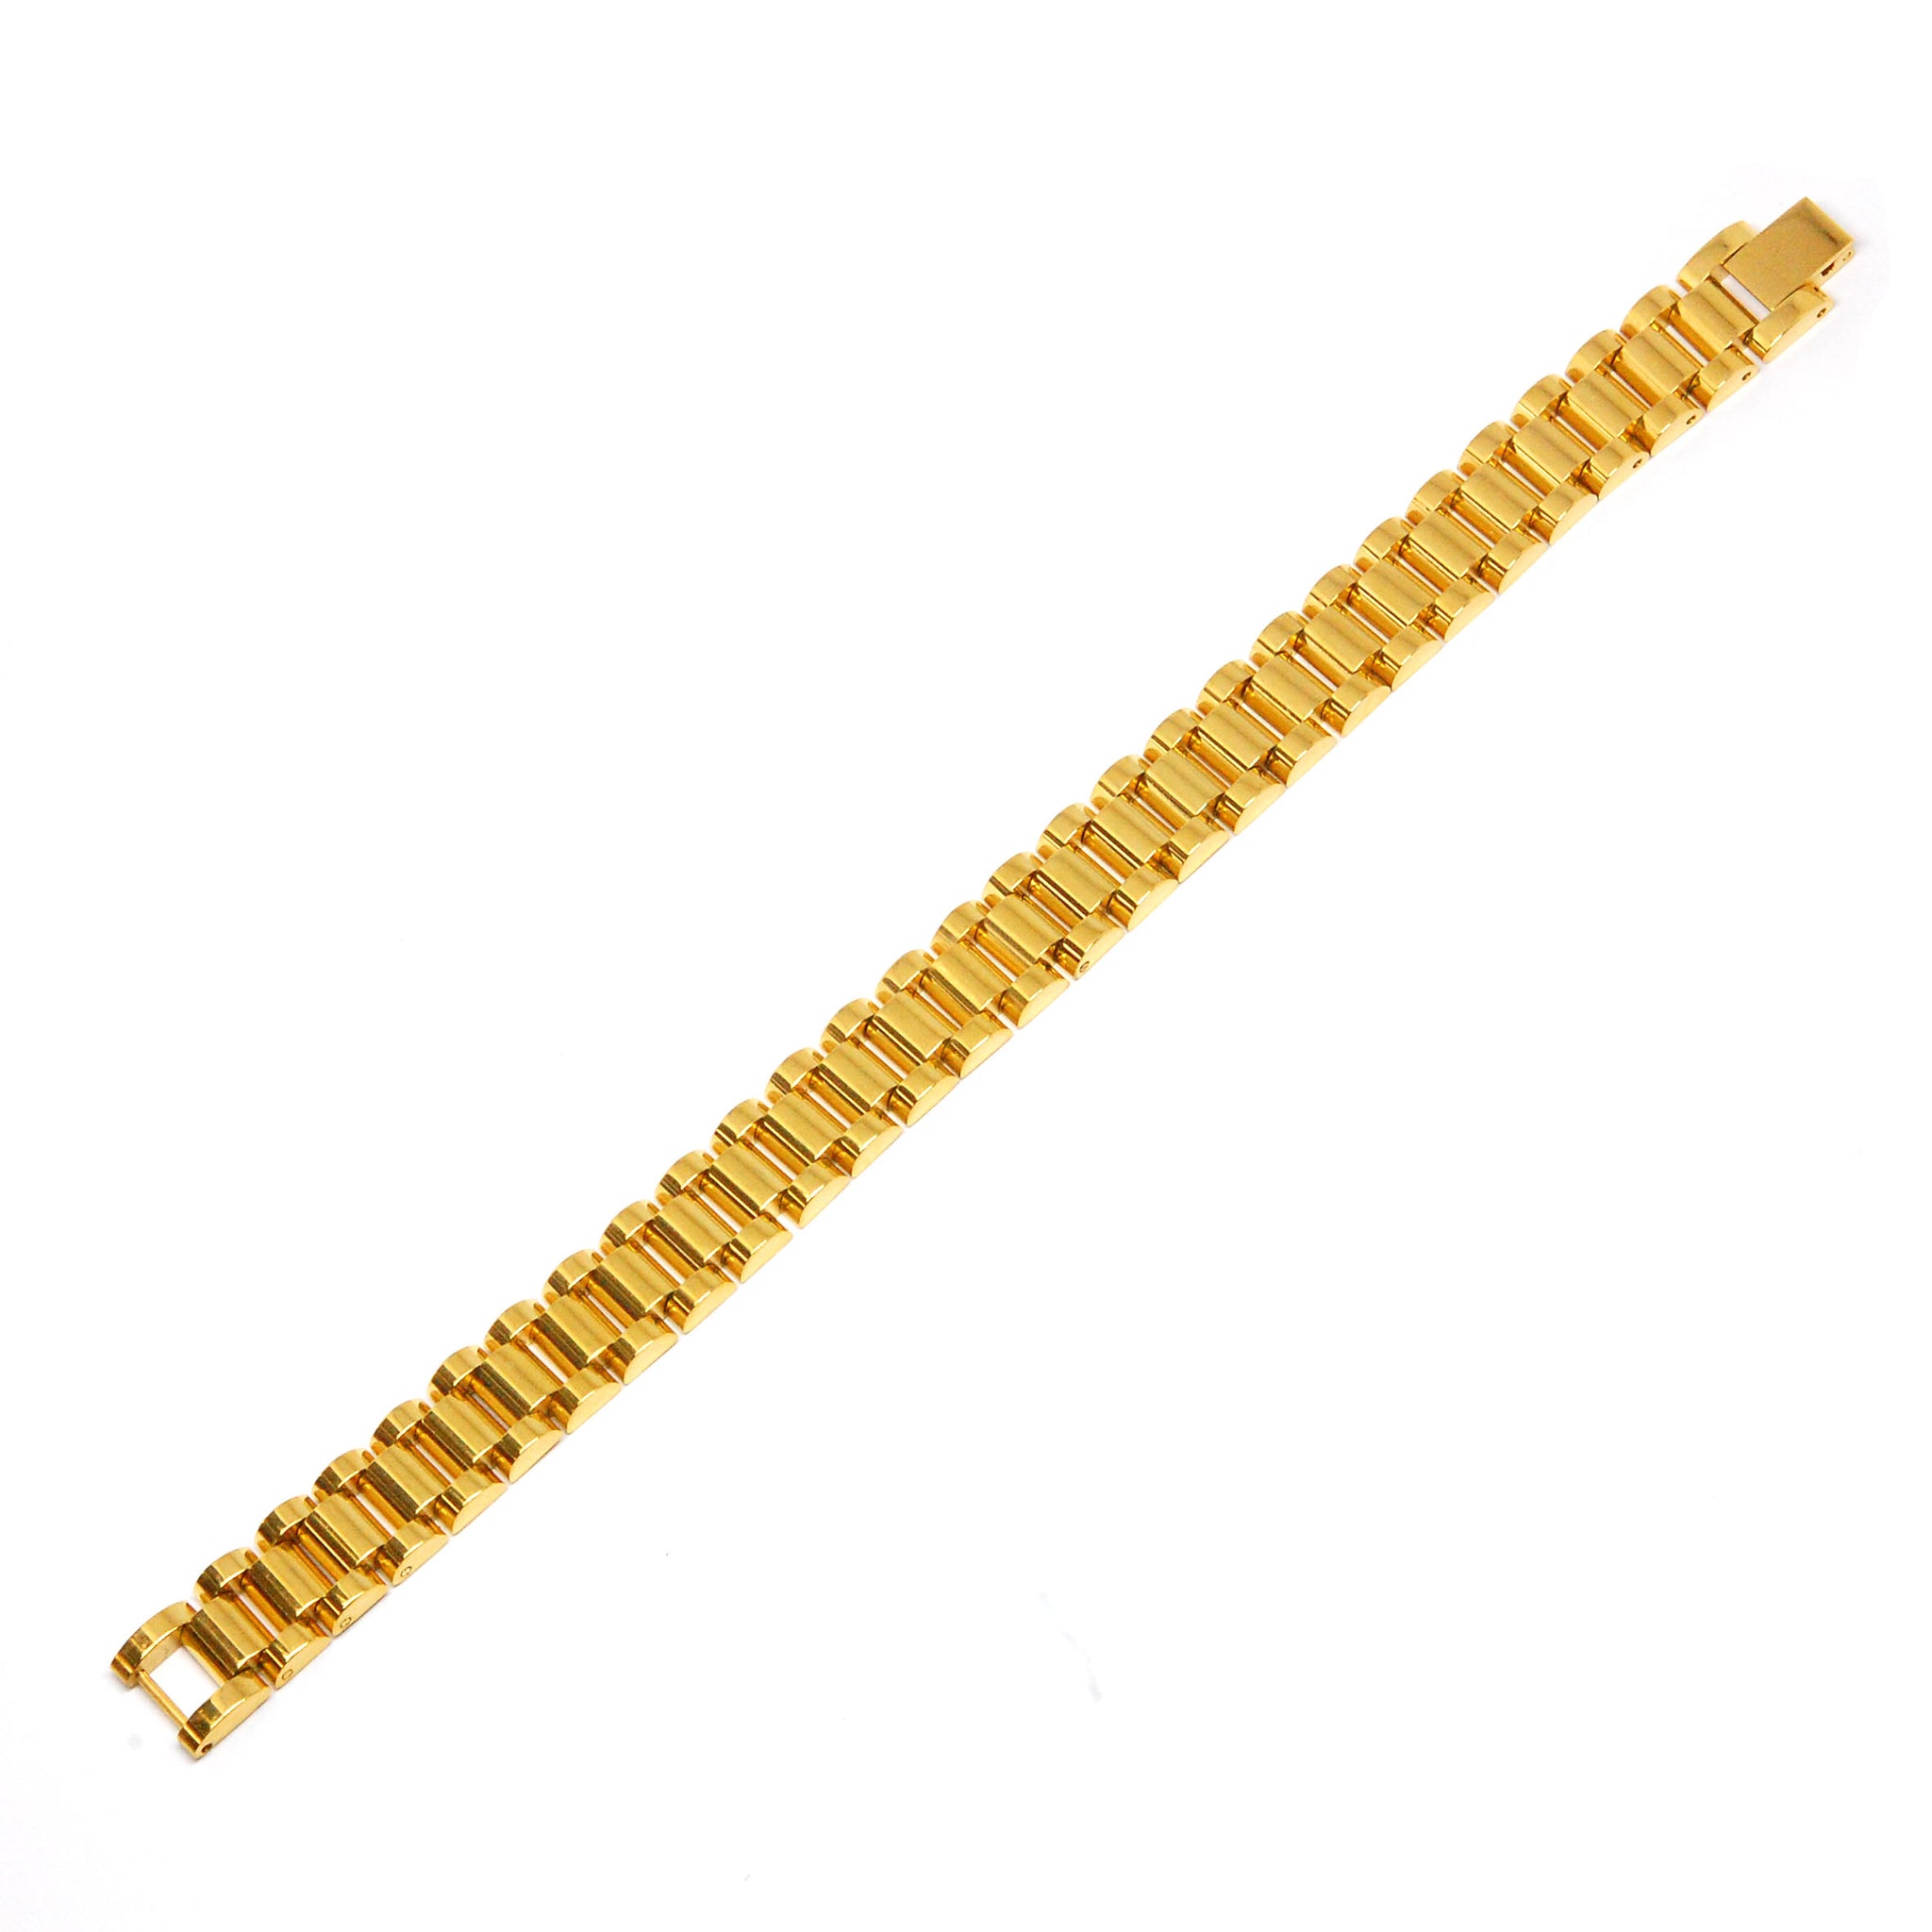 ESBL 7745: All Gold-Plated Rolex Male Bracelet (12mm)